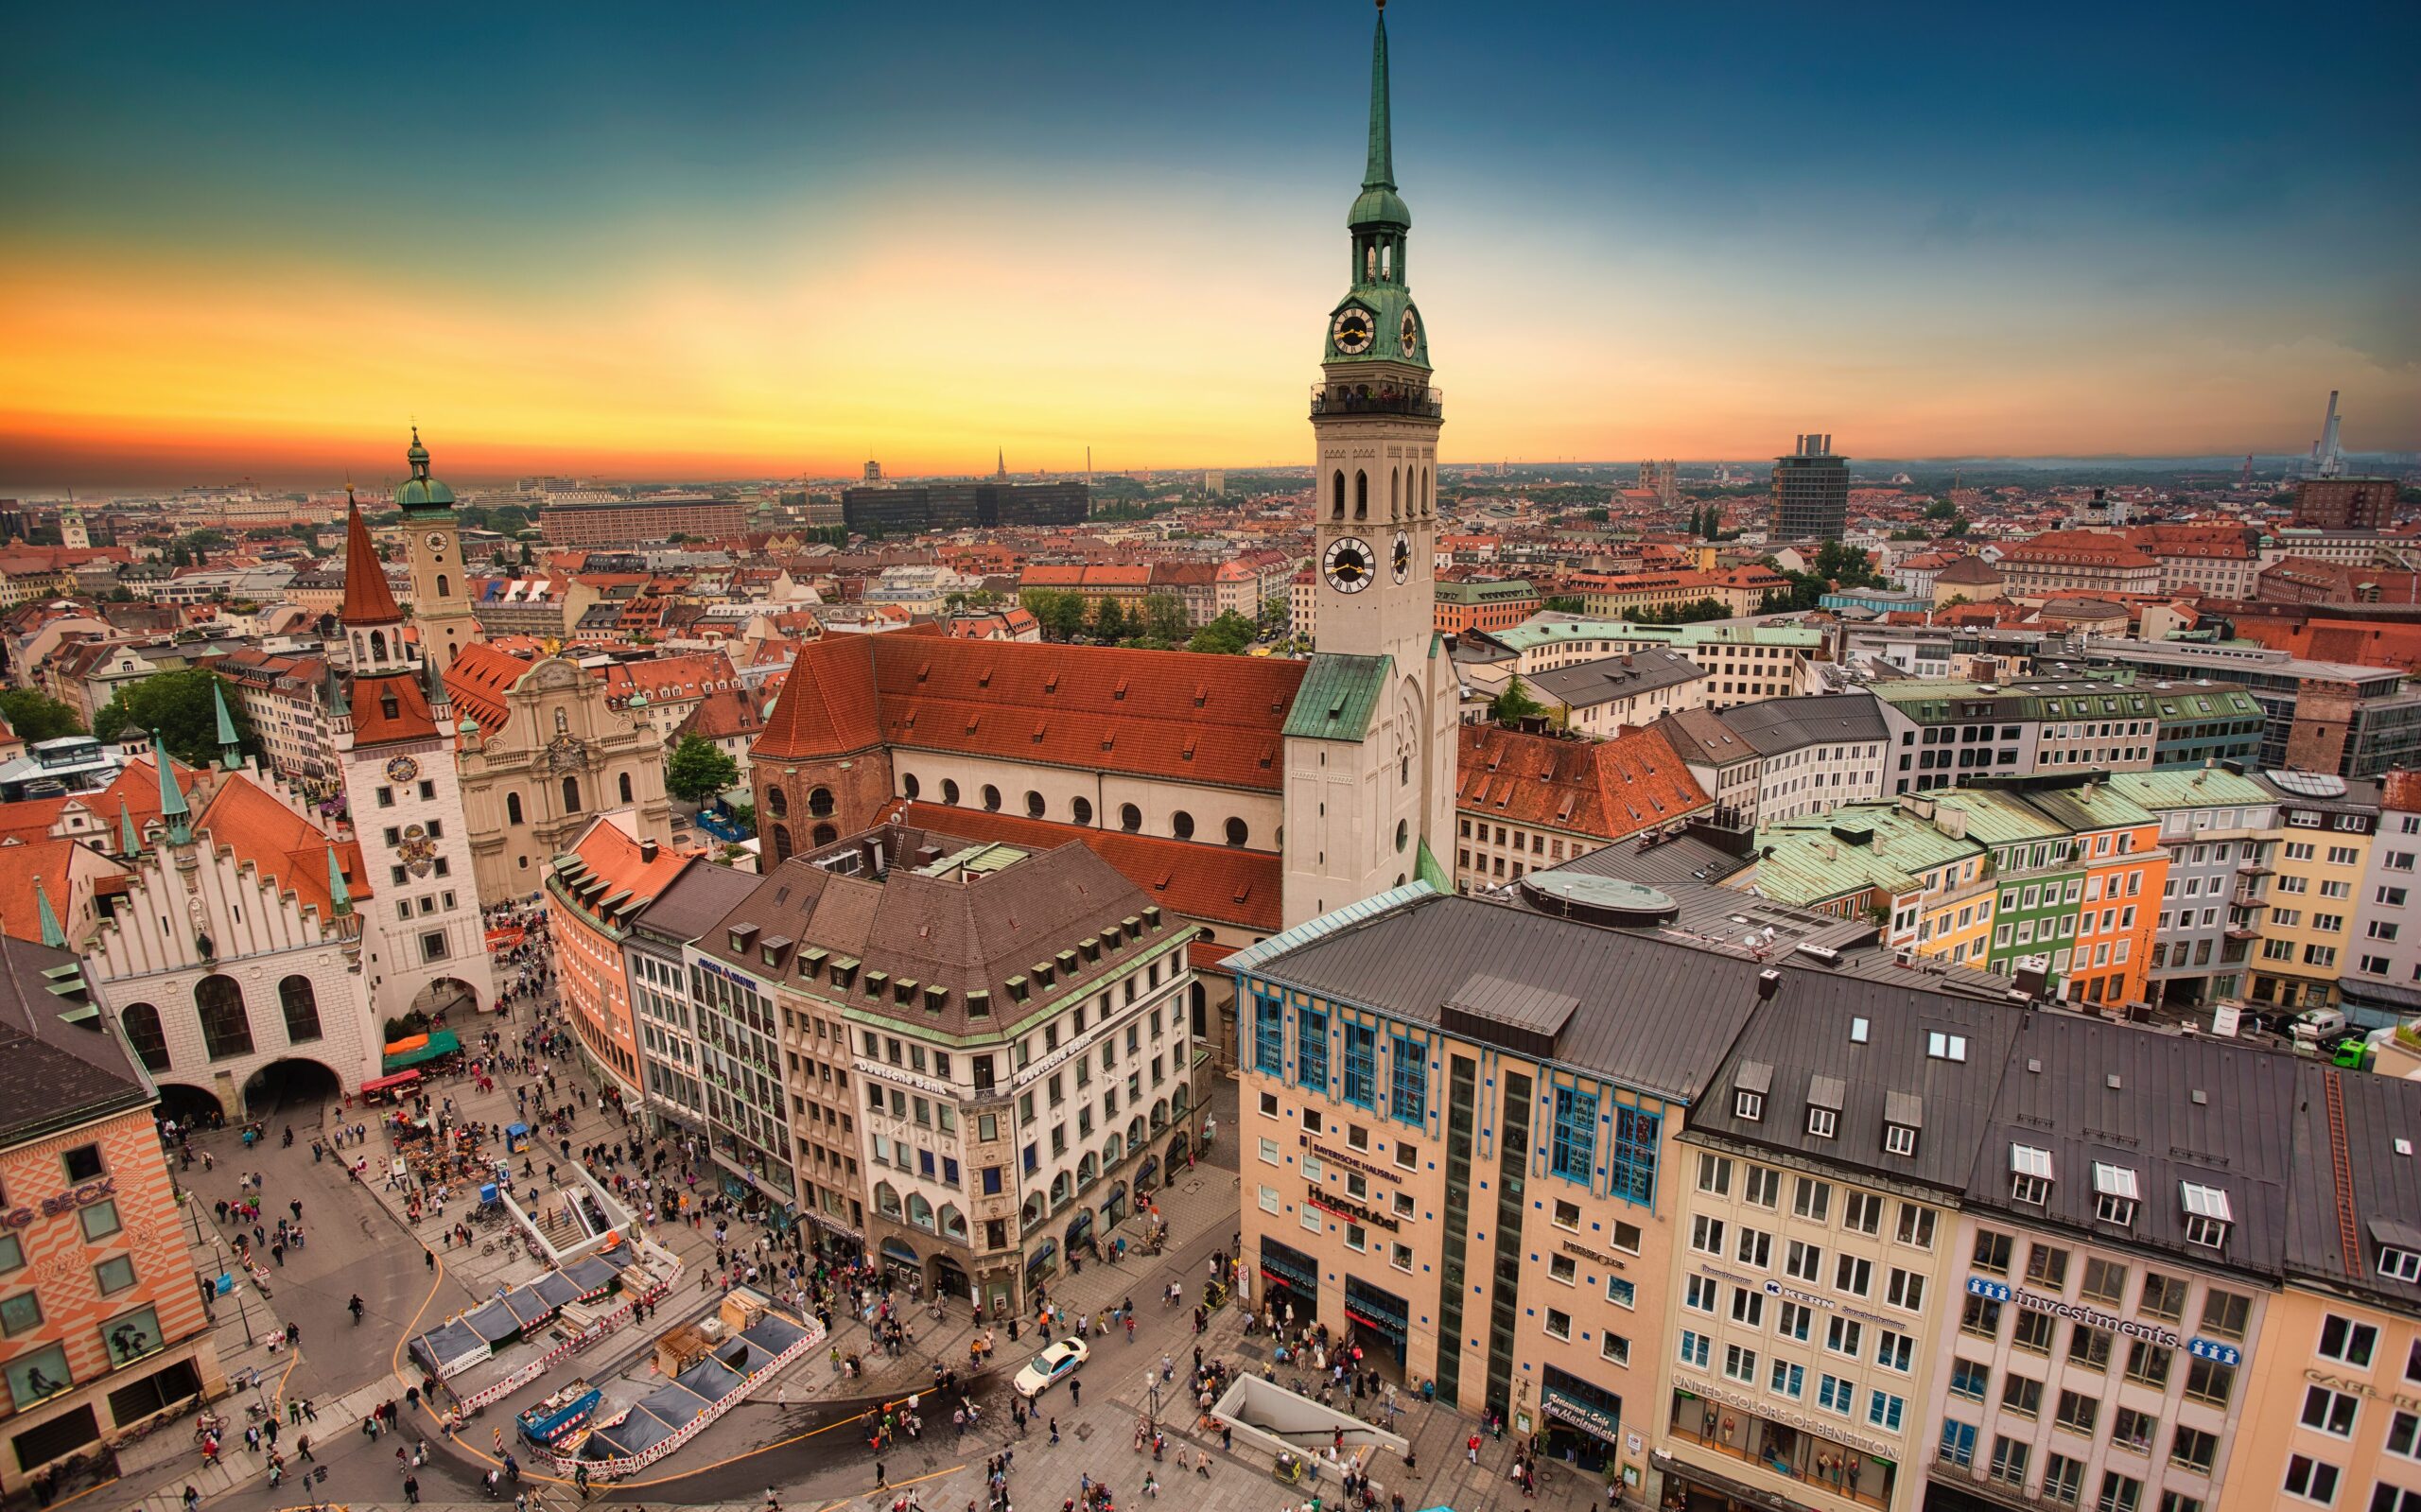 Pictured:  evening sunset over town square in Munich Germany